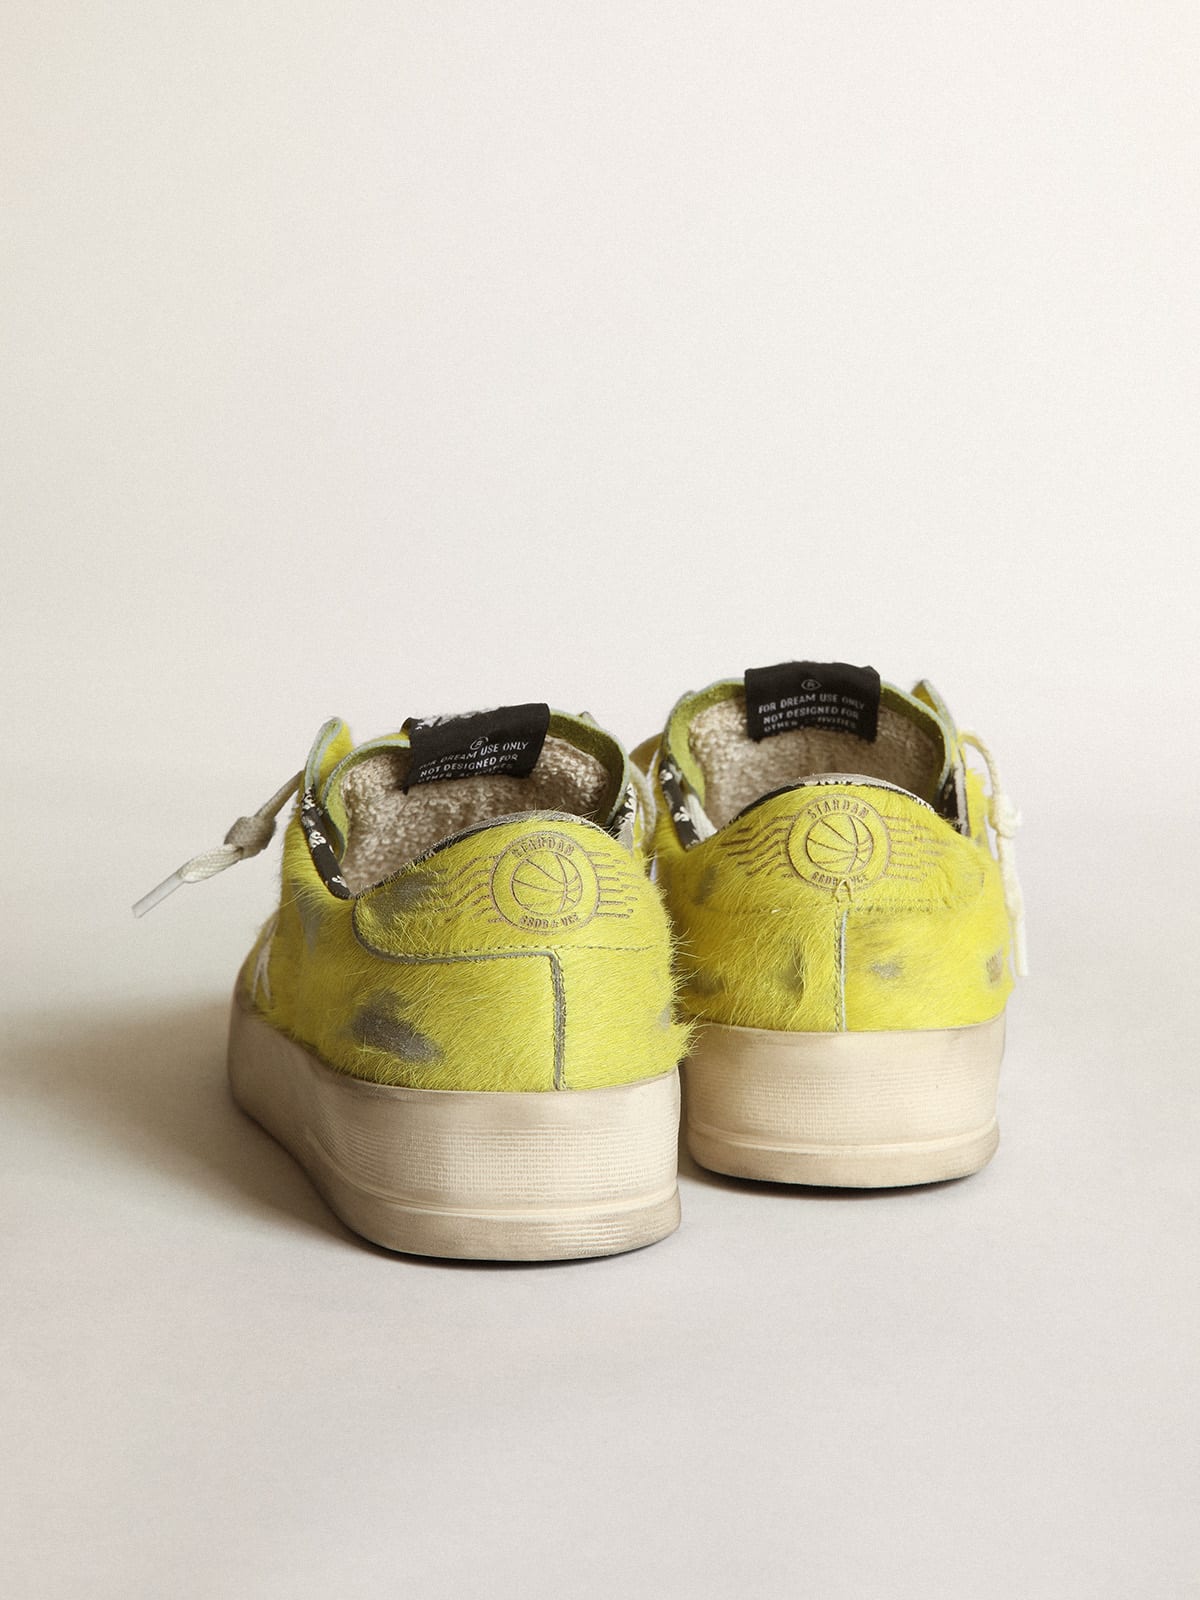 Golden Goose - Women’s Stardan sneakers in fluorescent yellow pony skin with white leather star in 